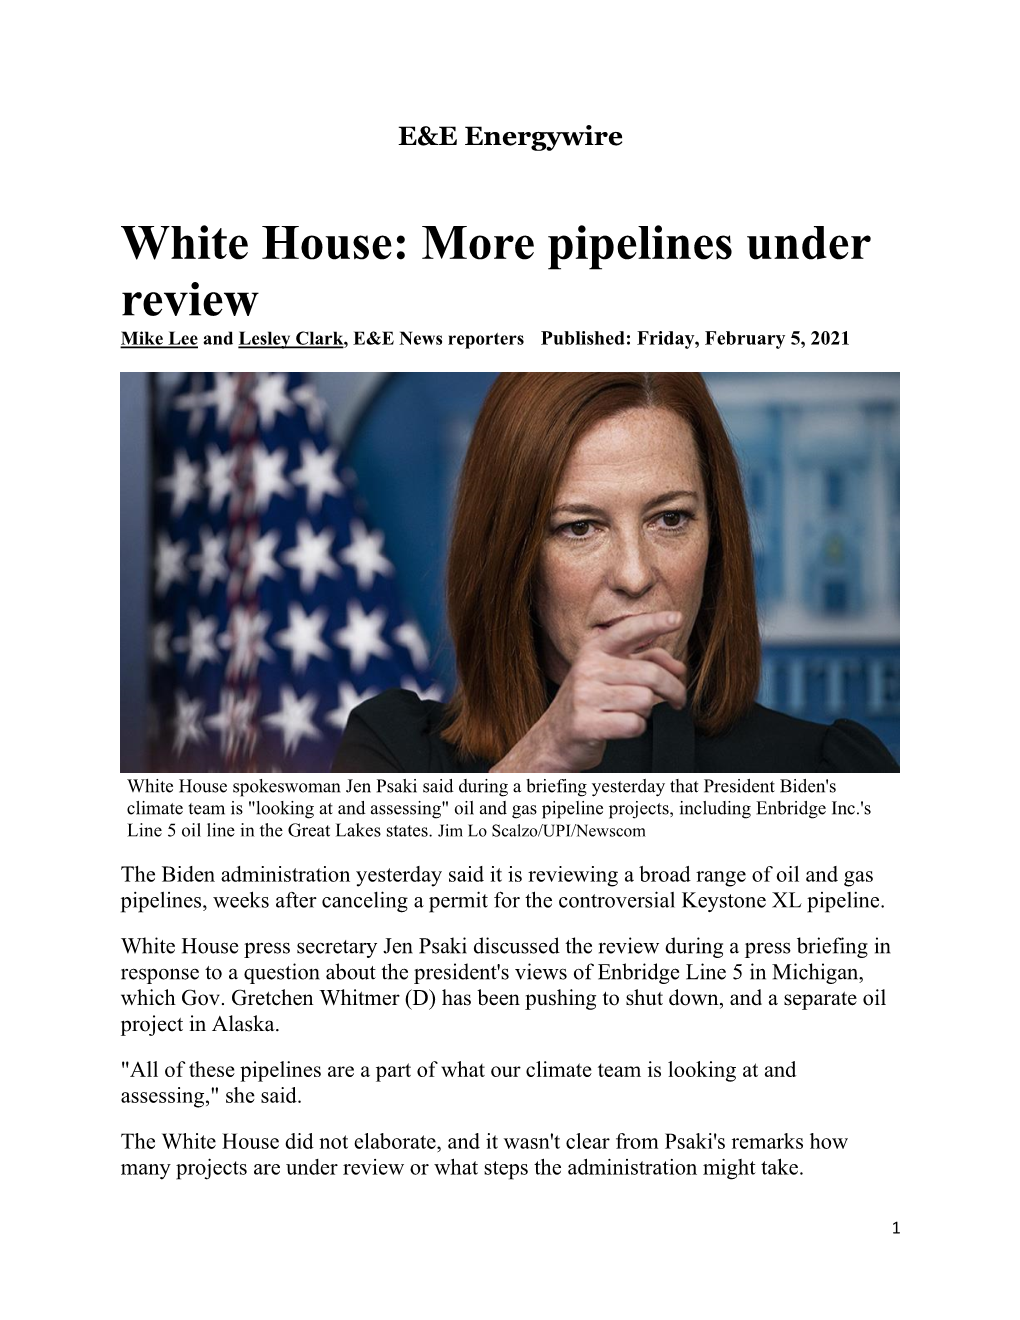 White House: More Pipelines Under Review Mike Lee and Lesley Clark, E&E News Reporters Published: Friday, February 5, 2021